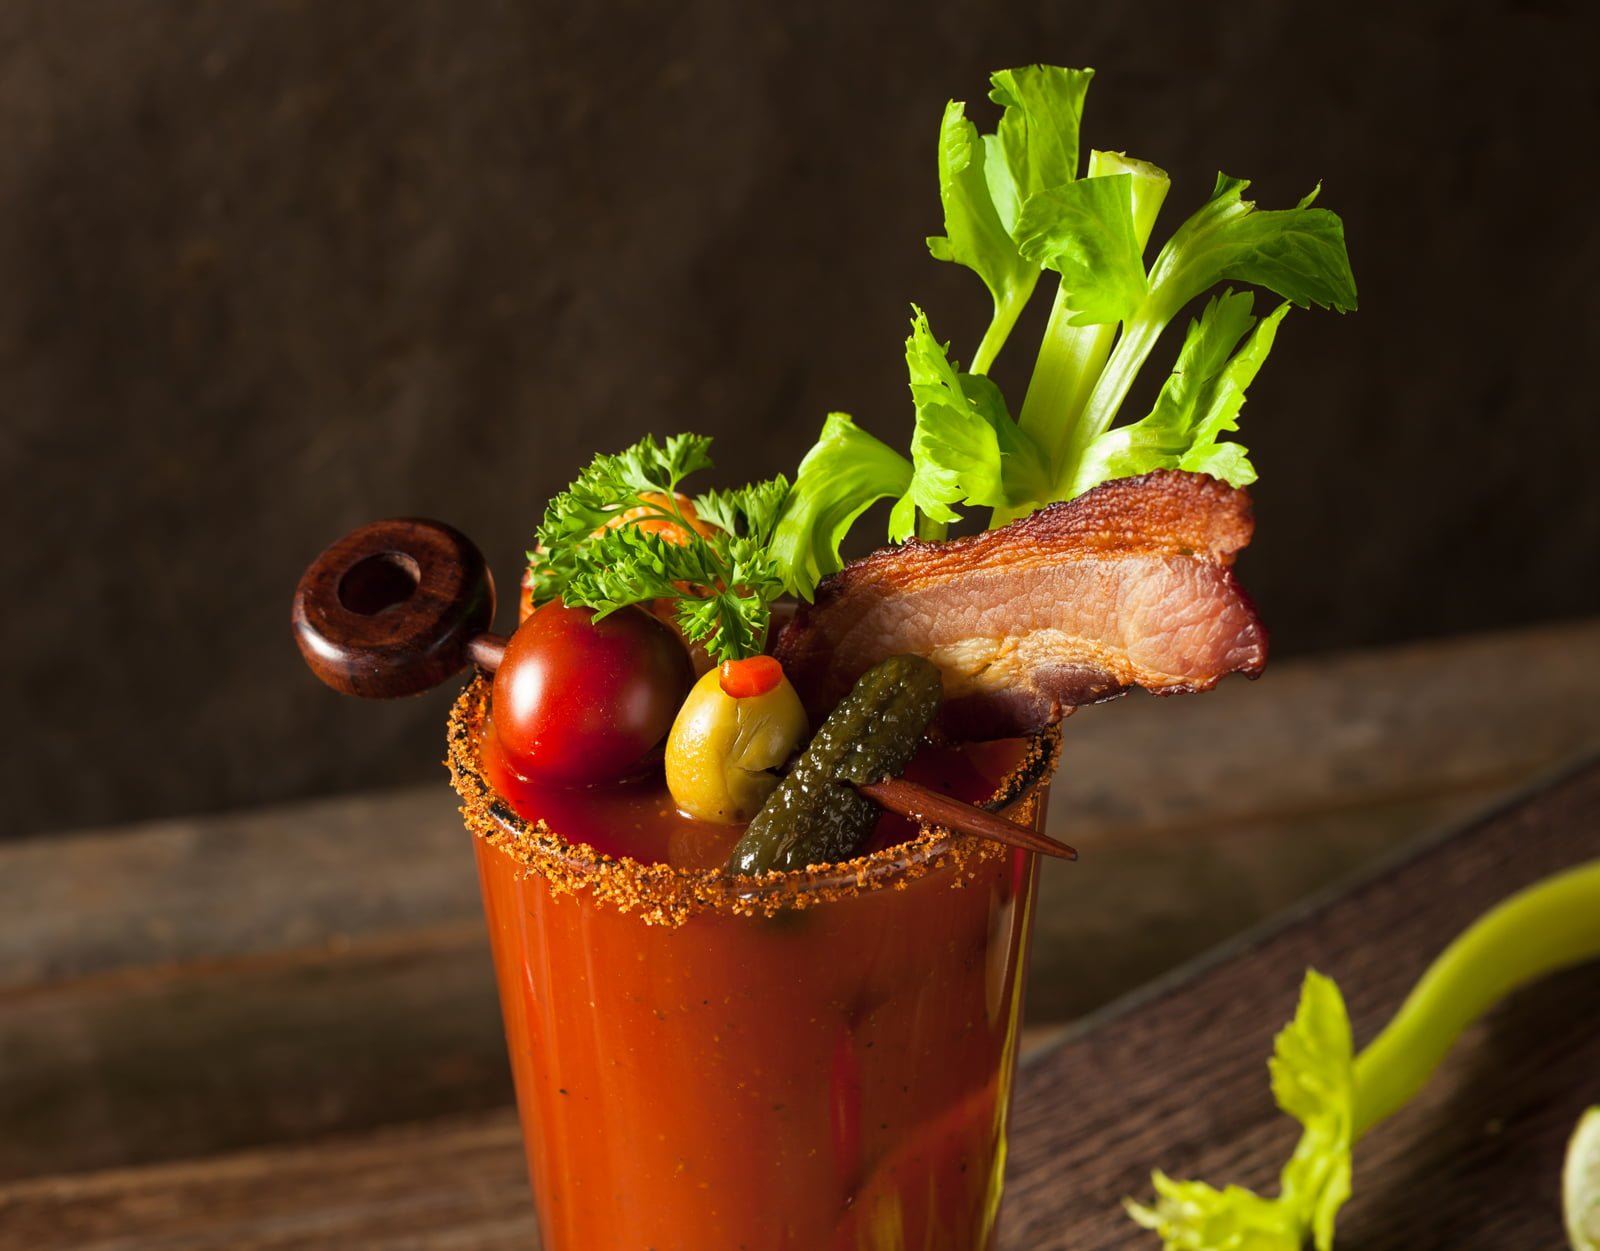 Homemade Bloody Mary Mix Recipe - The Art of Food and Wine